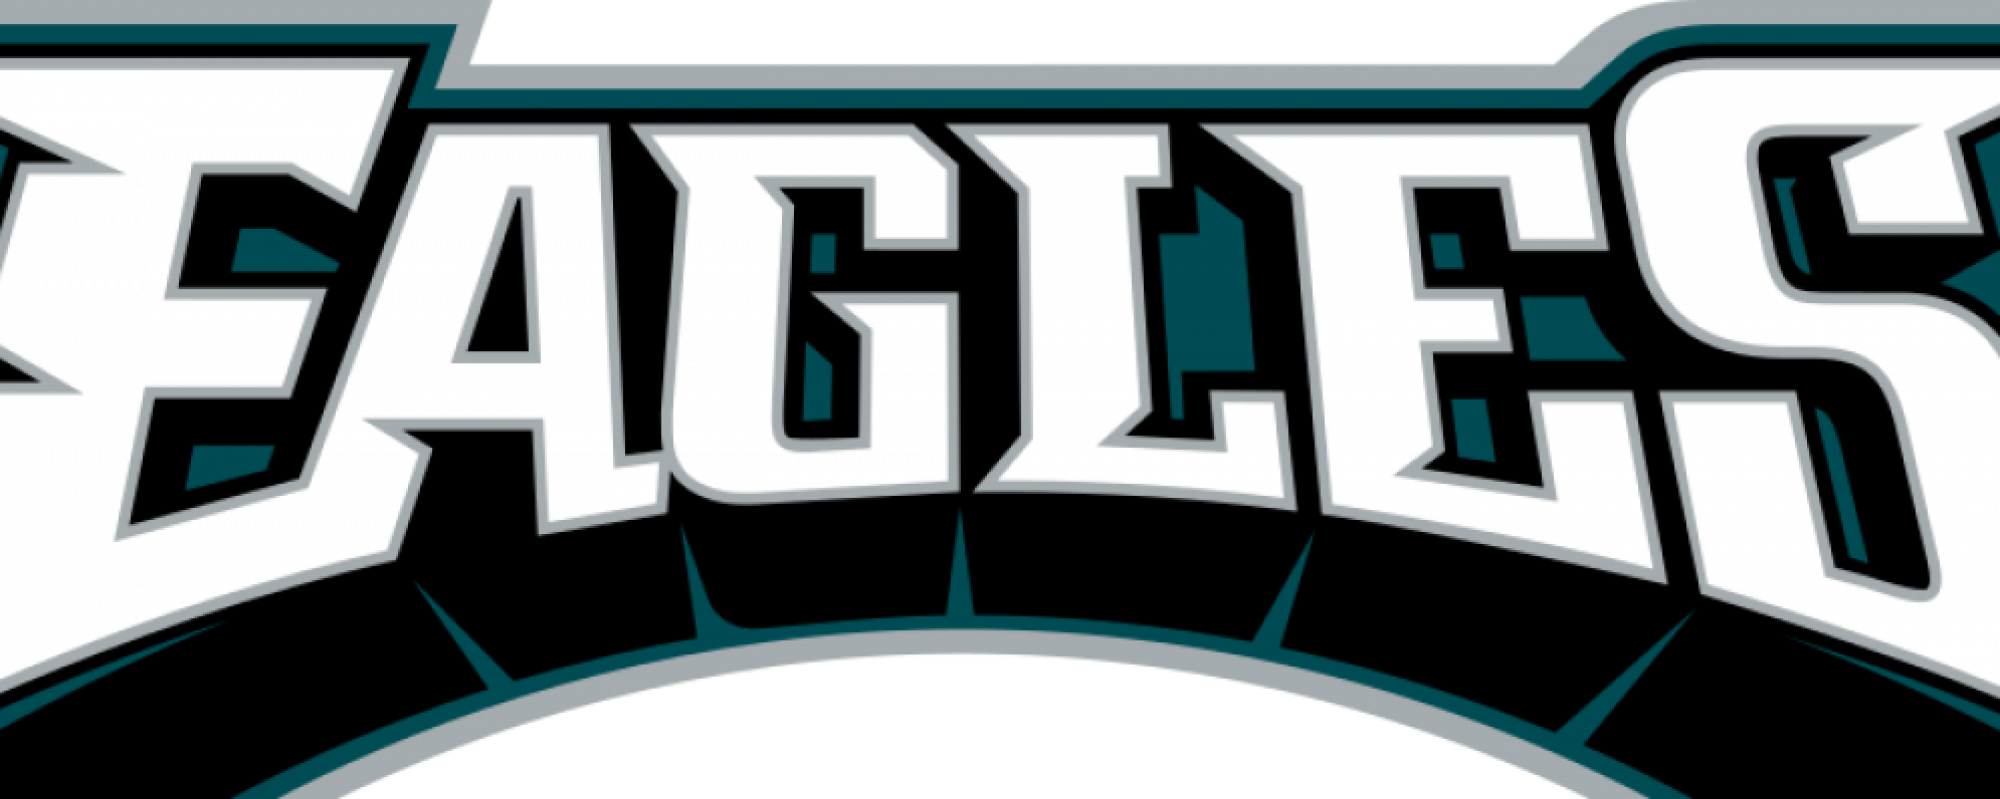 Getting The Swoop - Philadelphia Eagles Logo (2000x799), Png Download